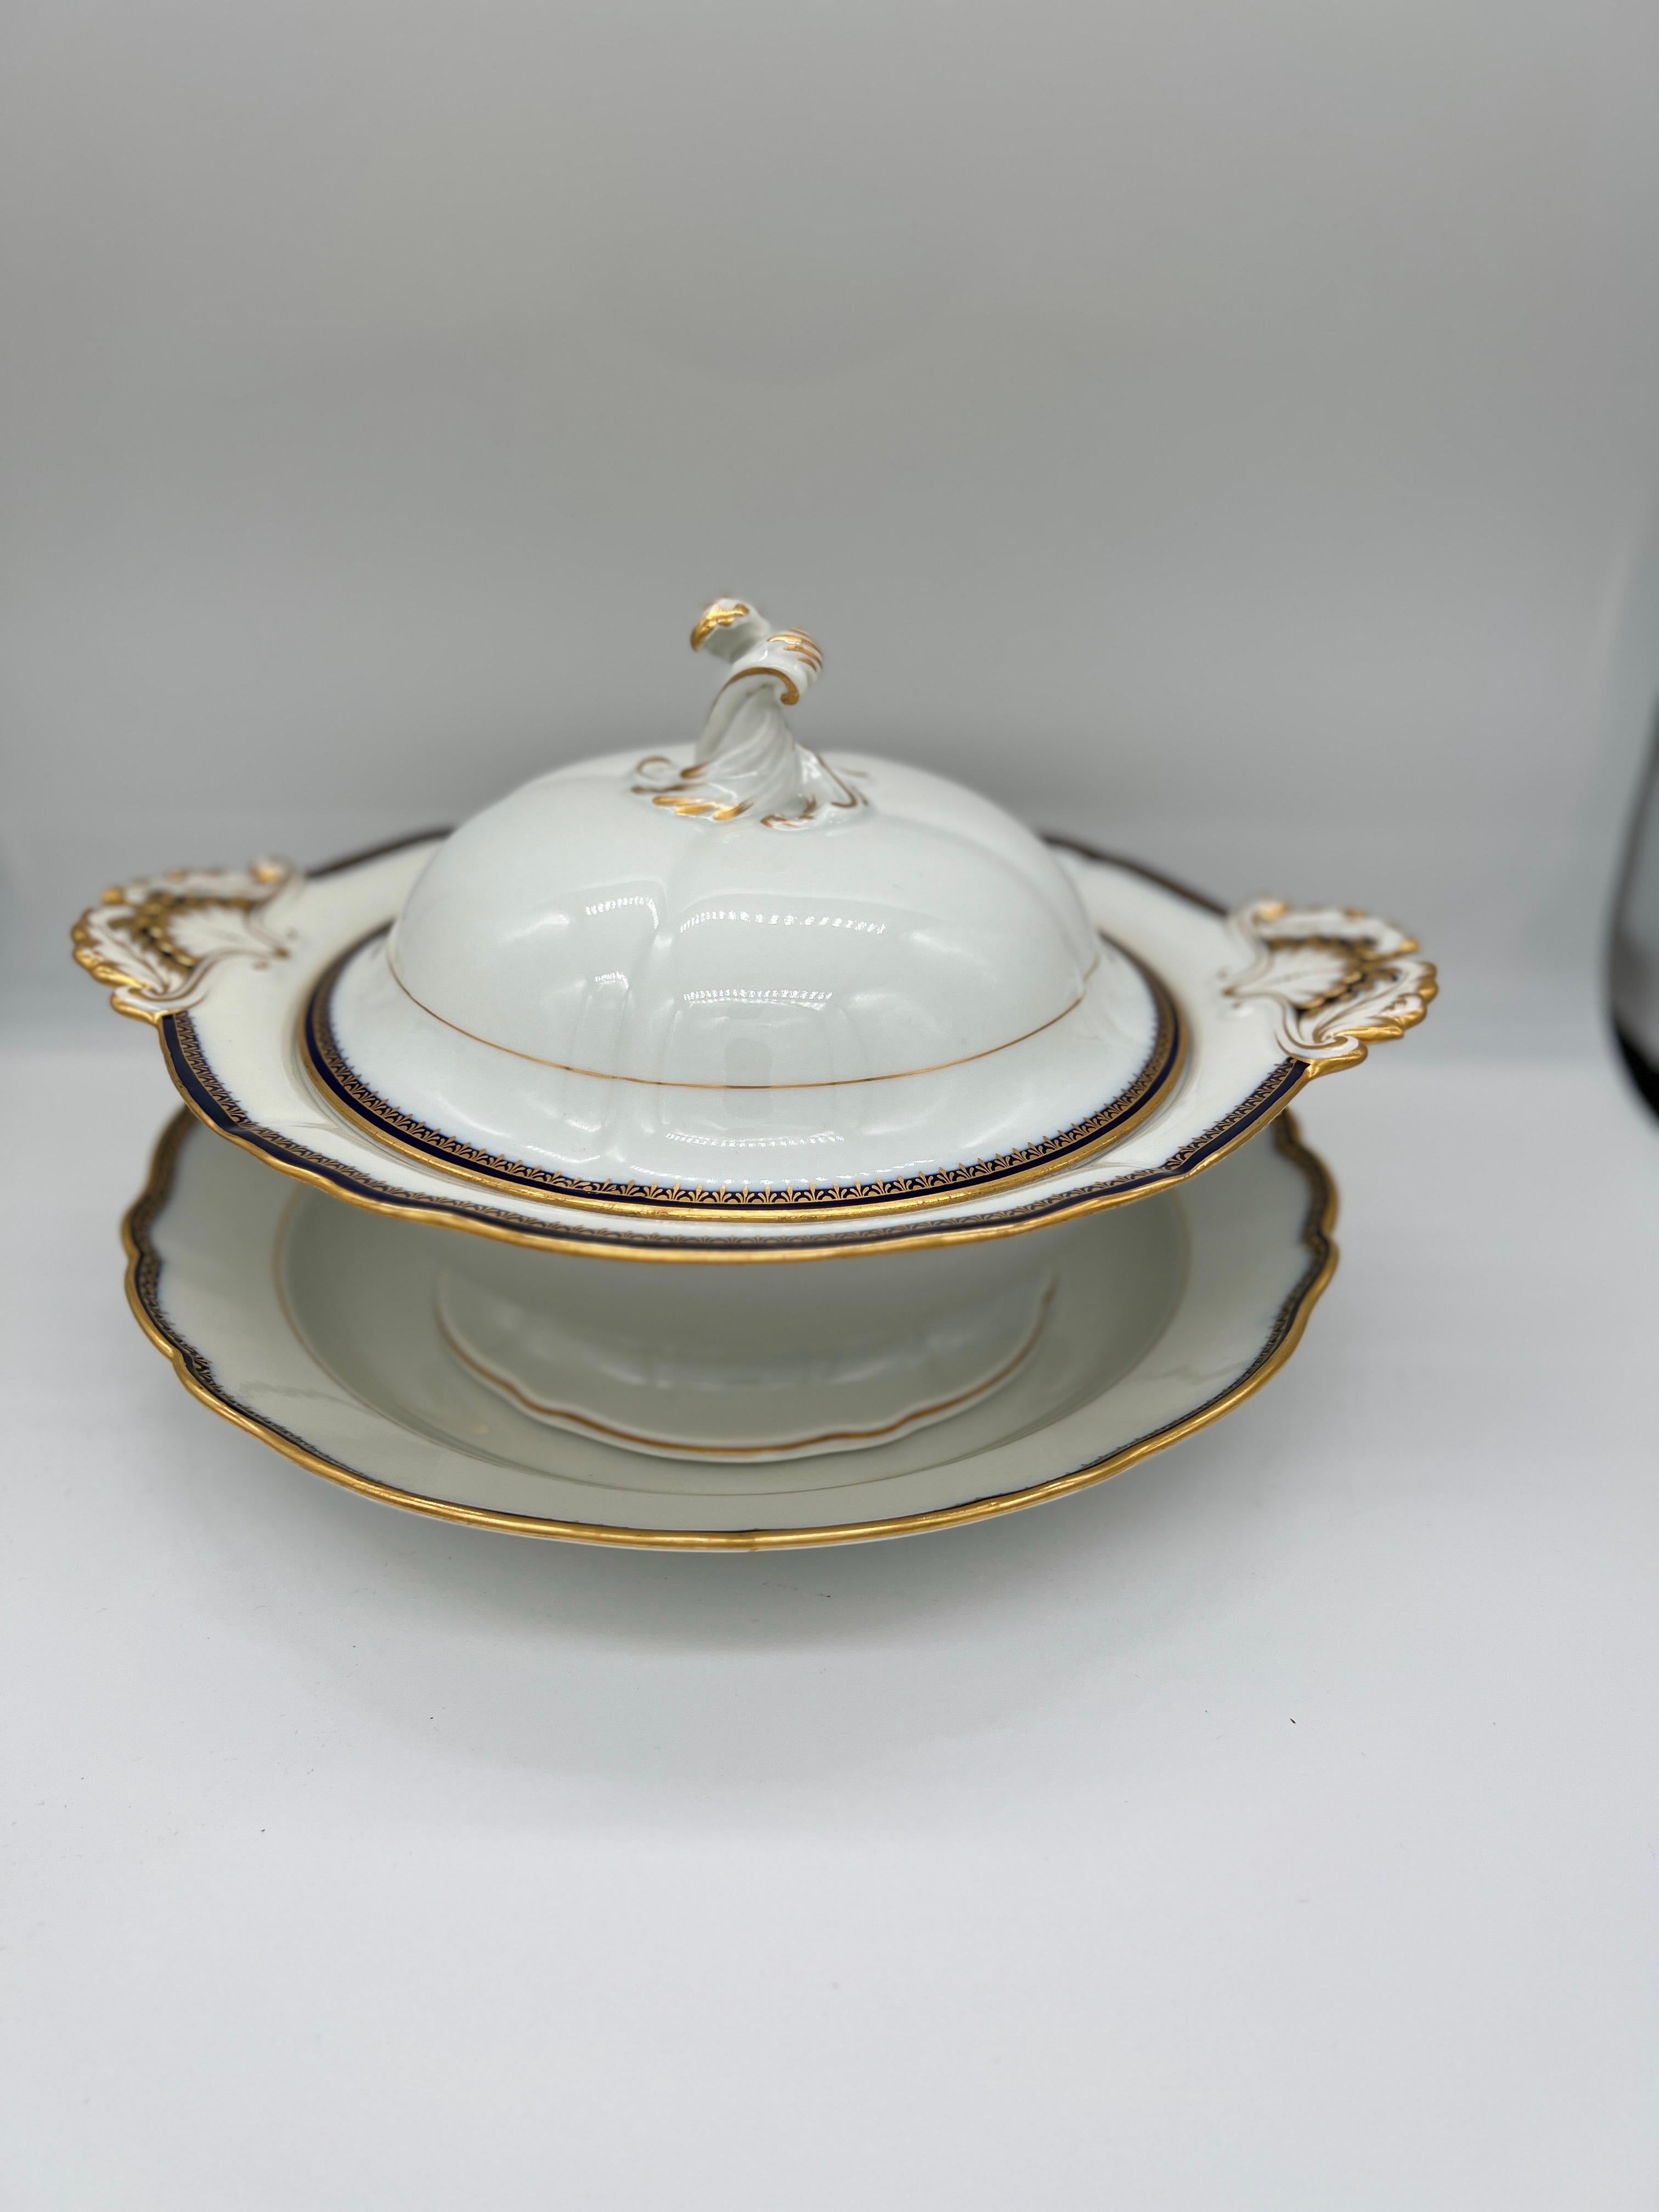 2 Pc, Meissen Porcelain Cobalt & Gold Rim Decorated Soup Tureen, Under Platter. 
The soup tureen is classic porcelain white and decorated to the rim and accents with cobalt and gilt overlay. The handles have a feathered shell form and a braided